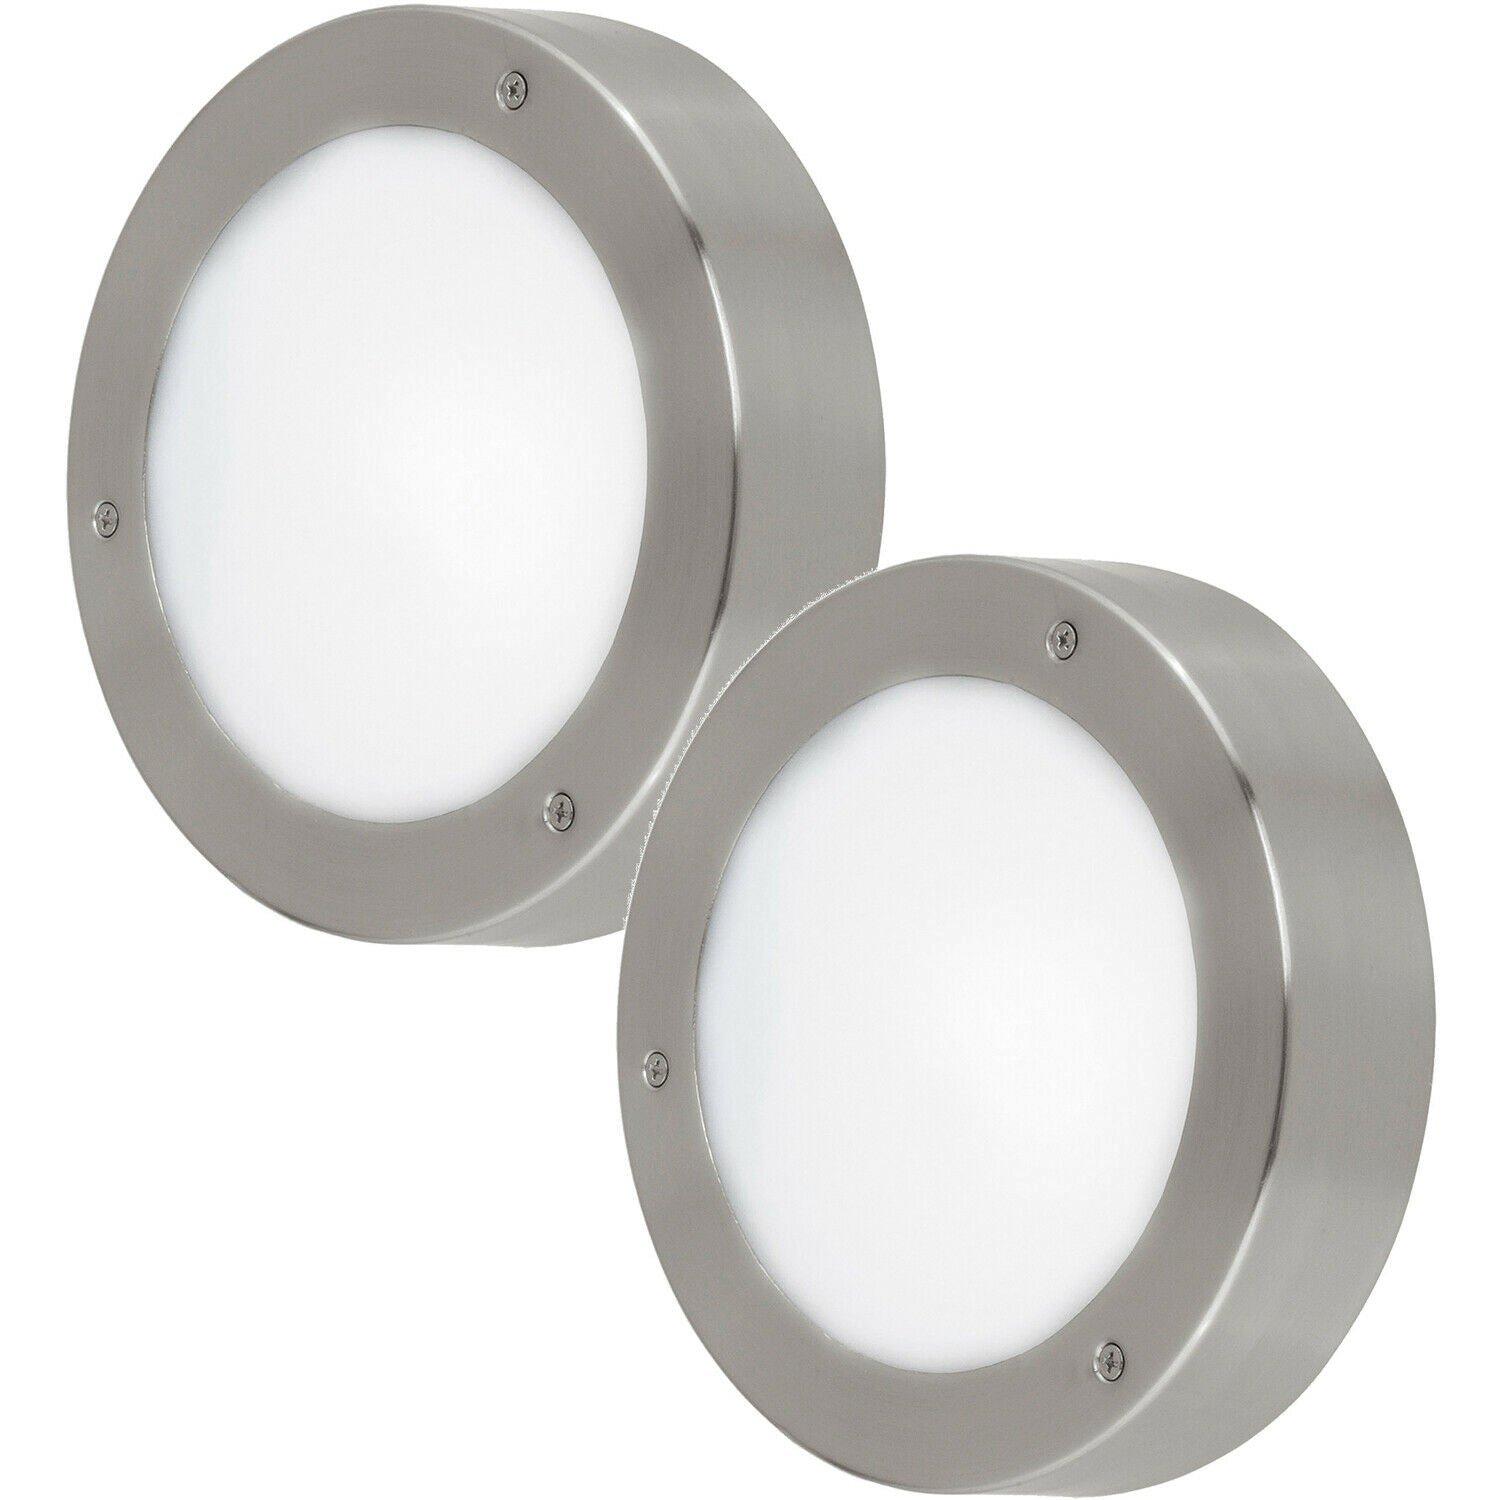 2 PACK IP44 Outdoor Wall Light Stainless Steel 5.4W Built in LED Porch Lamp